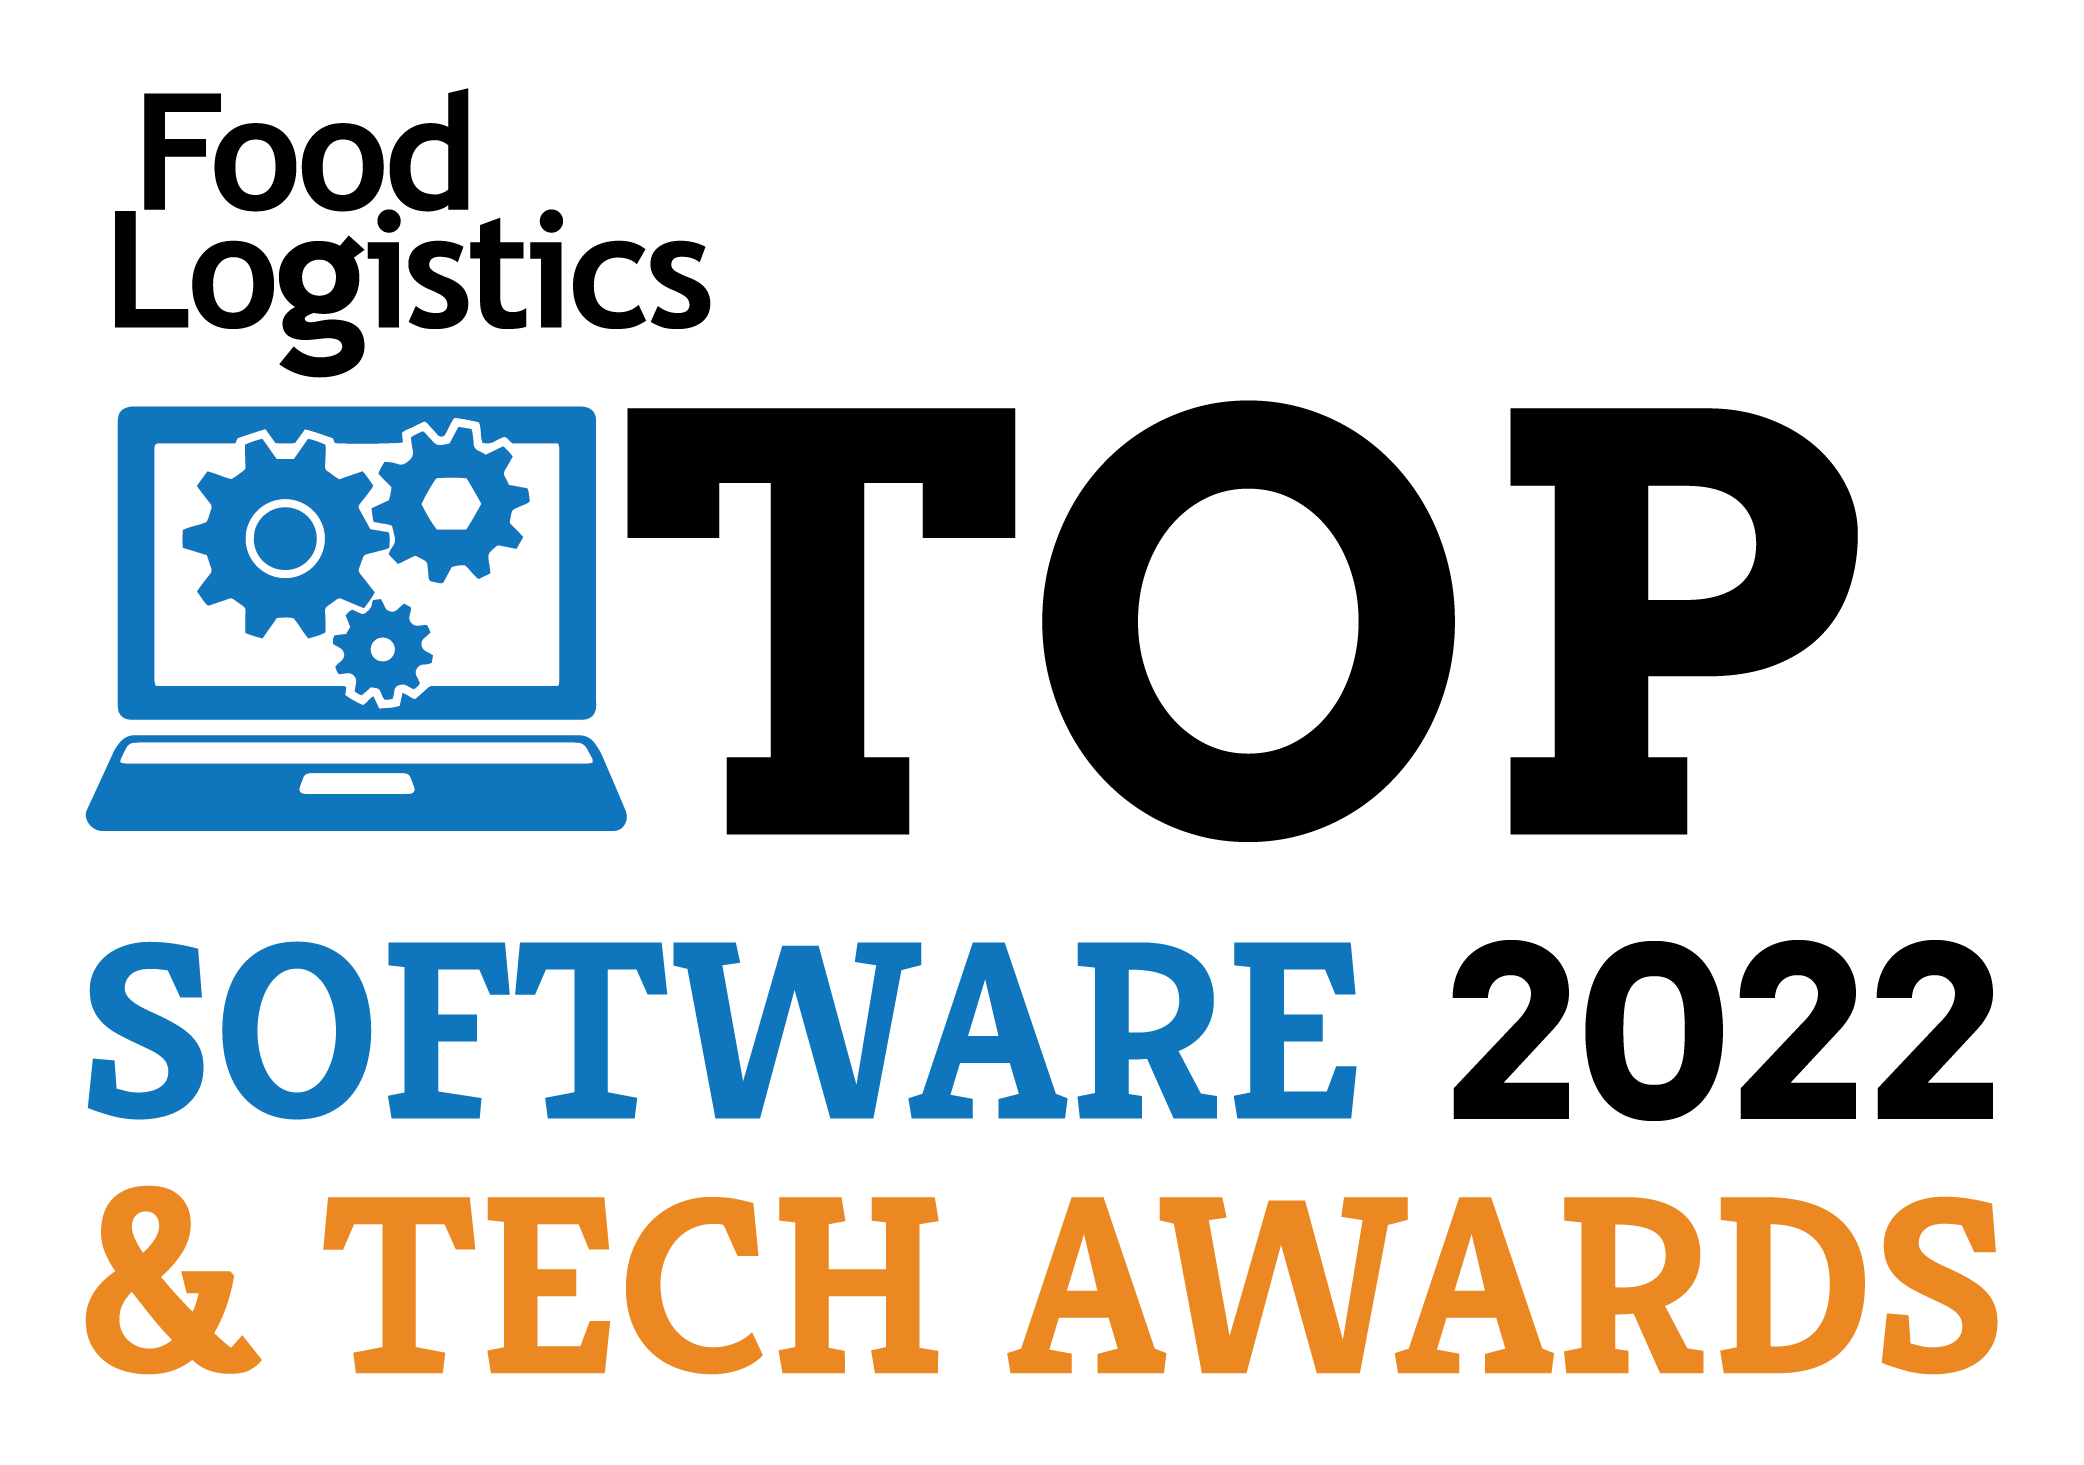 Food Logistics 2022 Top Software & Tech Awards, Software as a Solution, PLM TrustLink, Cold Supply Chain, transparency, traceability, trust, track and trace, RFID, supply chain management, inventory management, loT, SaaS